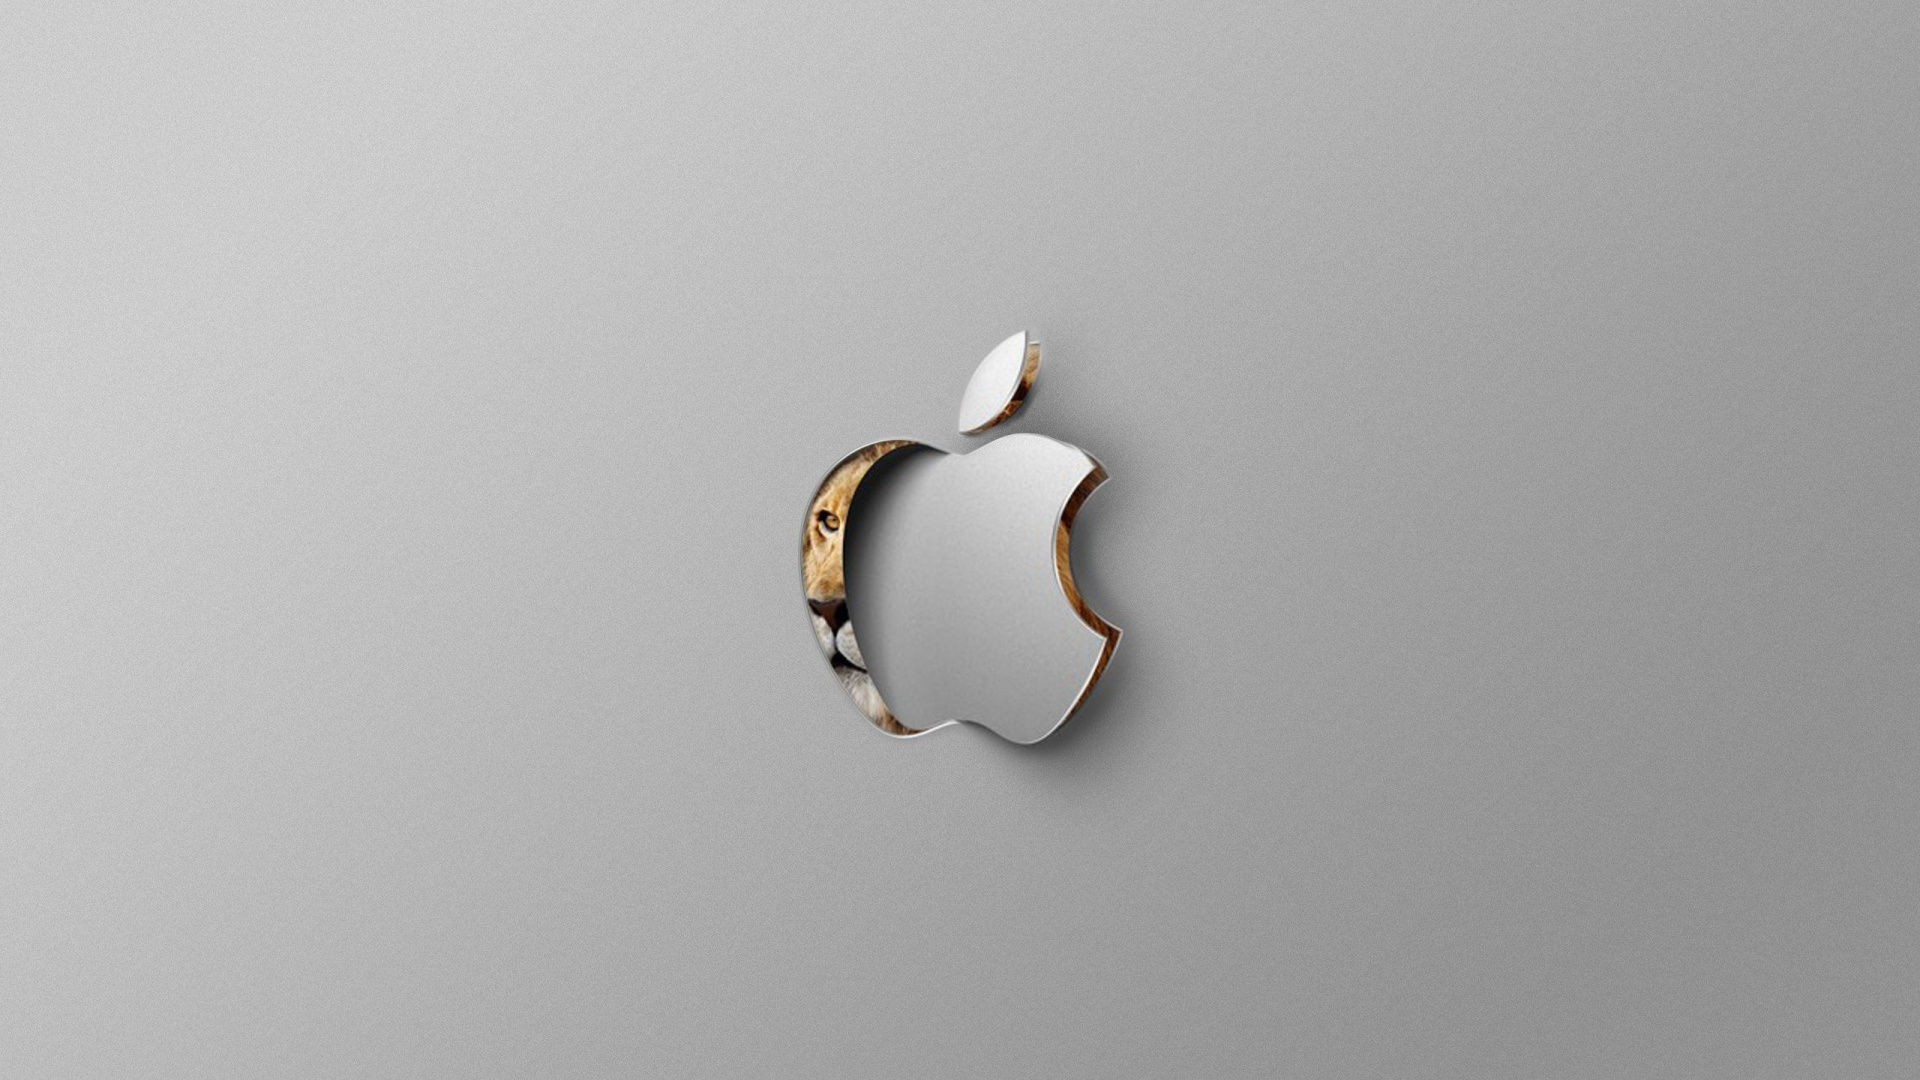 Apple, Operating System, Jewellery, OS X Mountain Lion, Operating Systems. Wallpaper in 1920x1080 Resolution